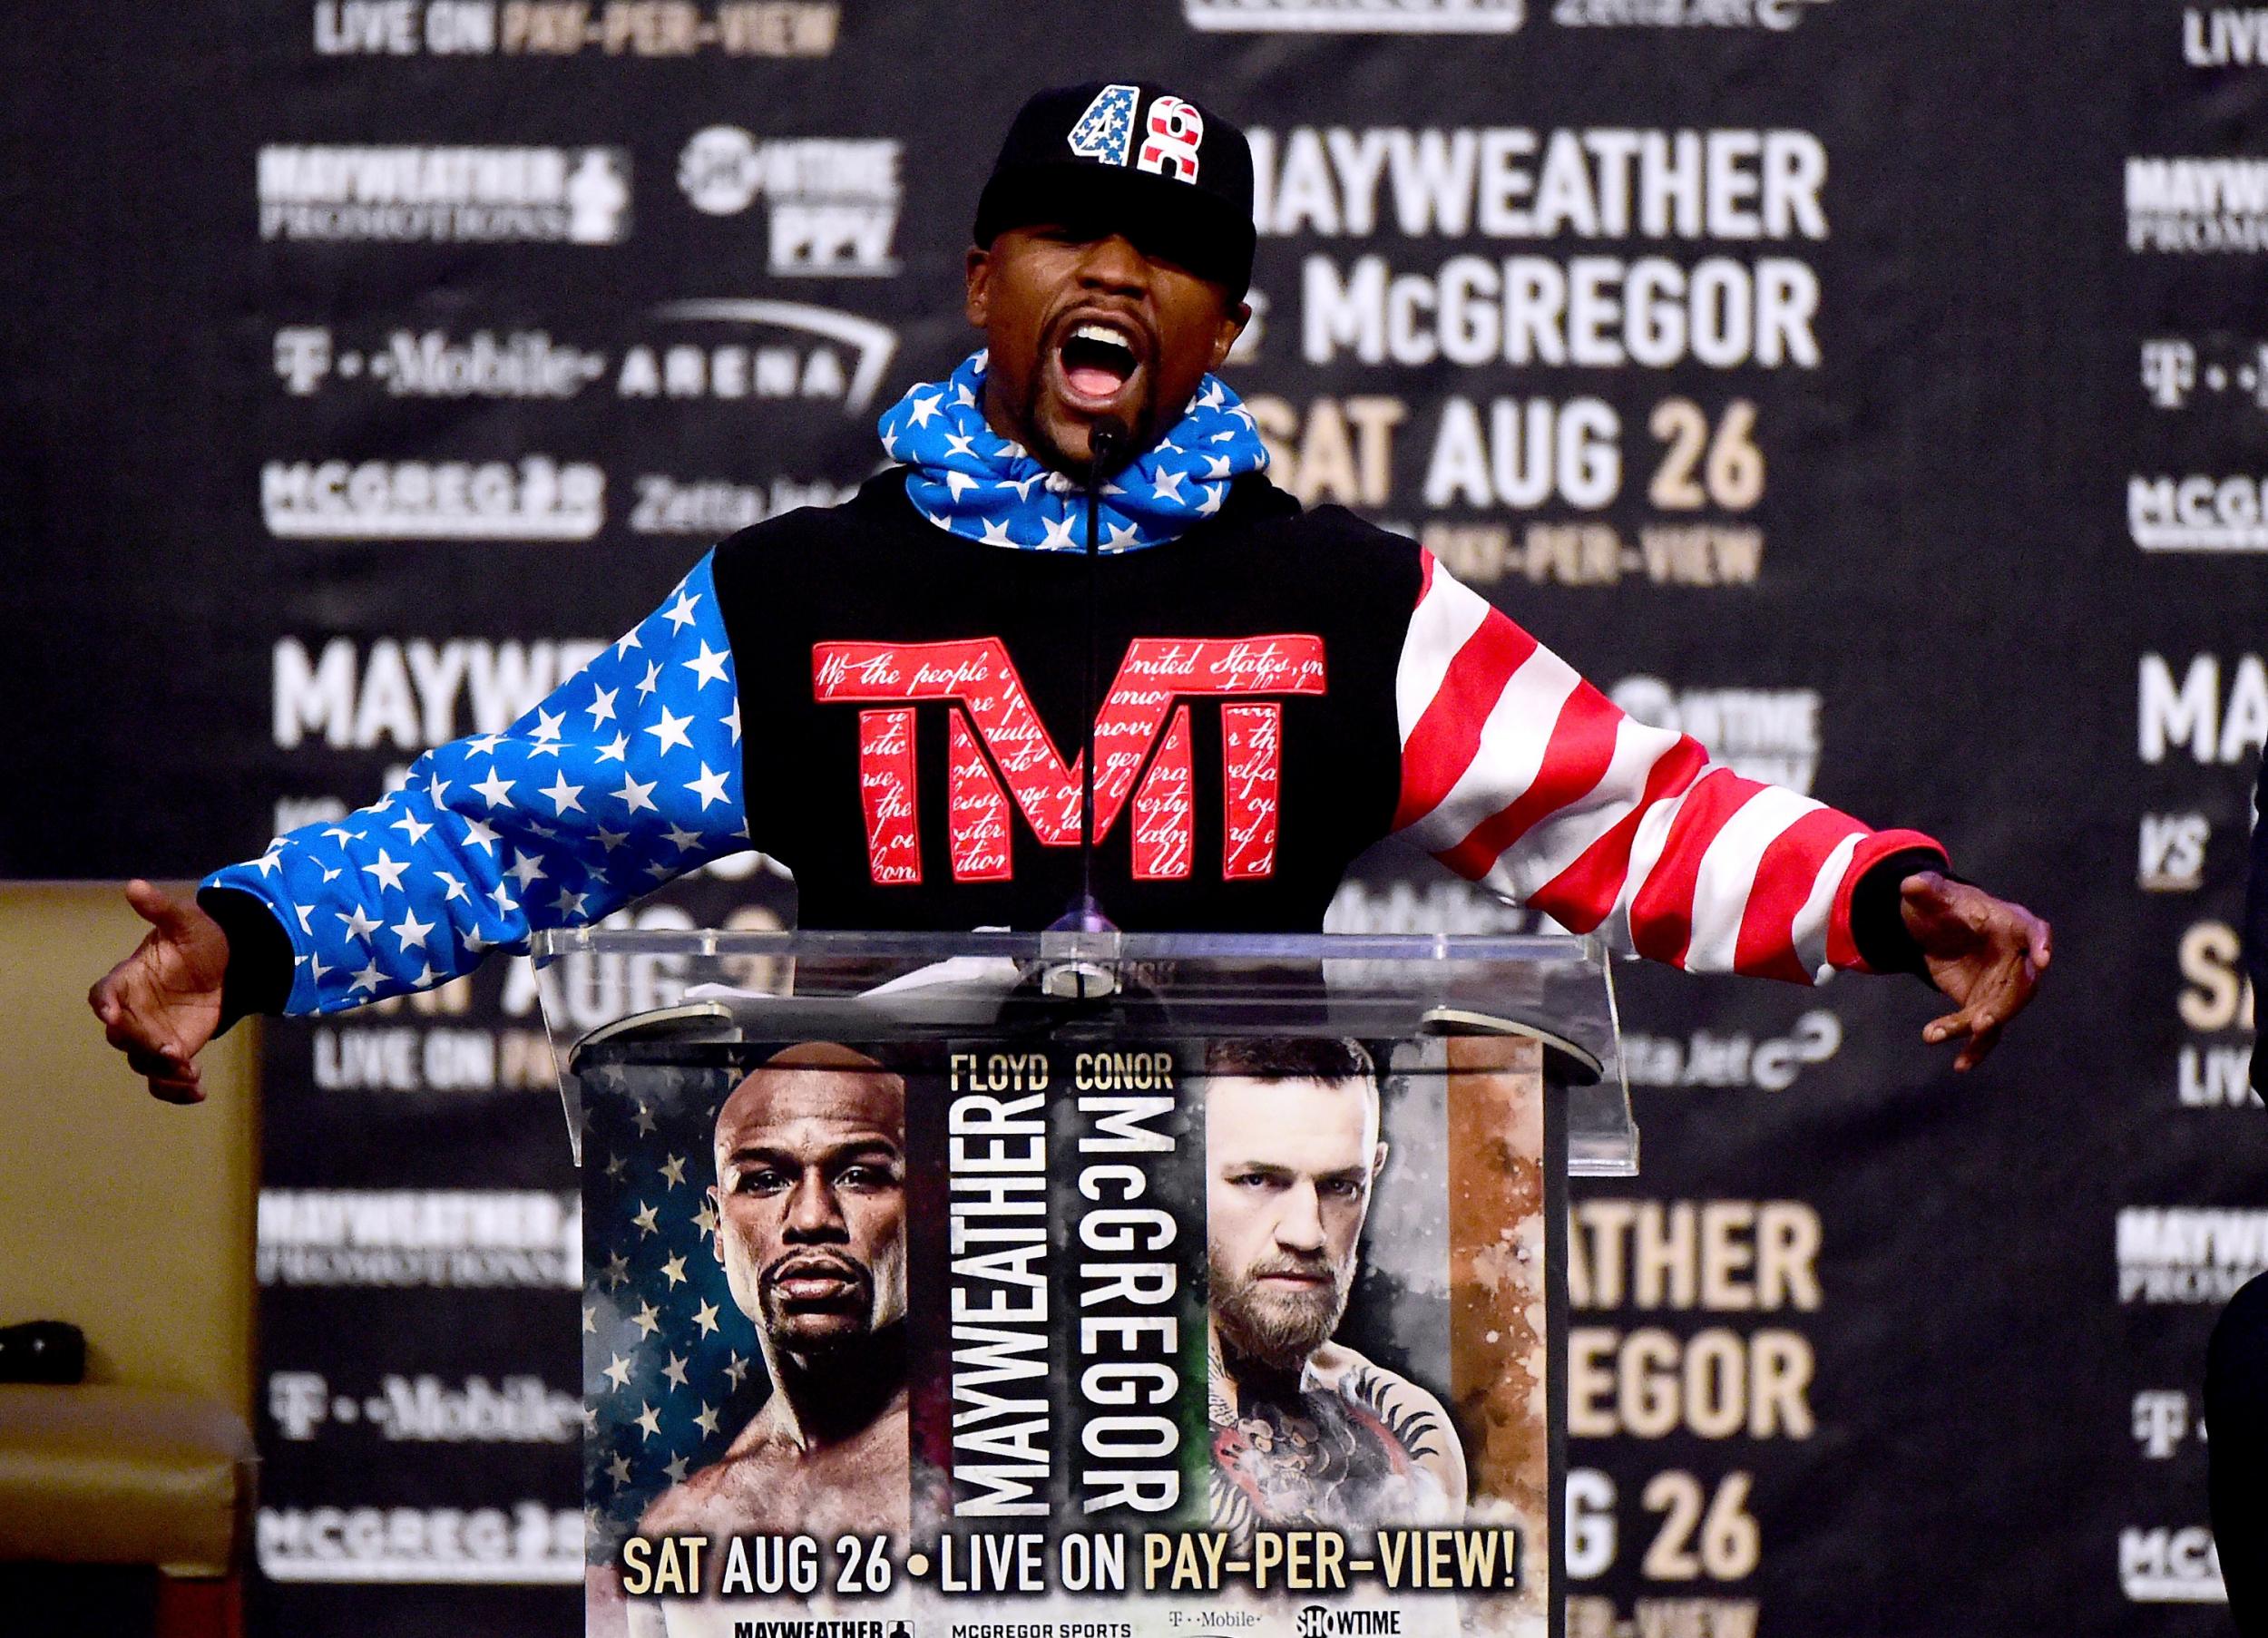 Mayweather cut a relaxed figure on stage